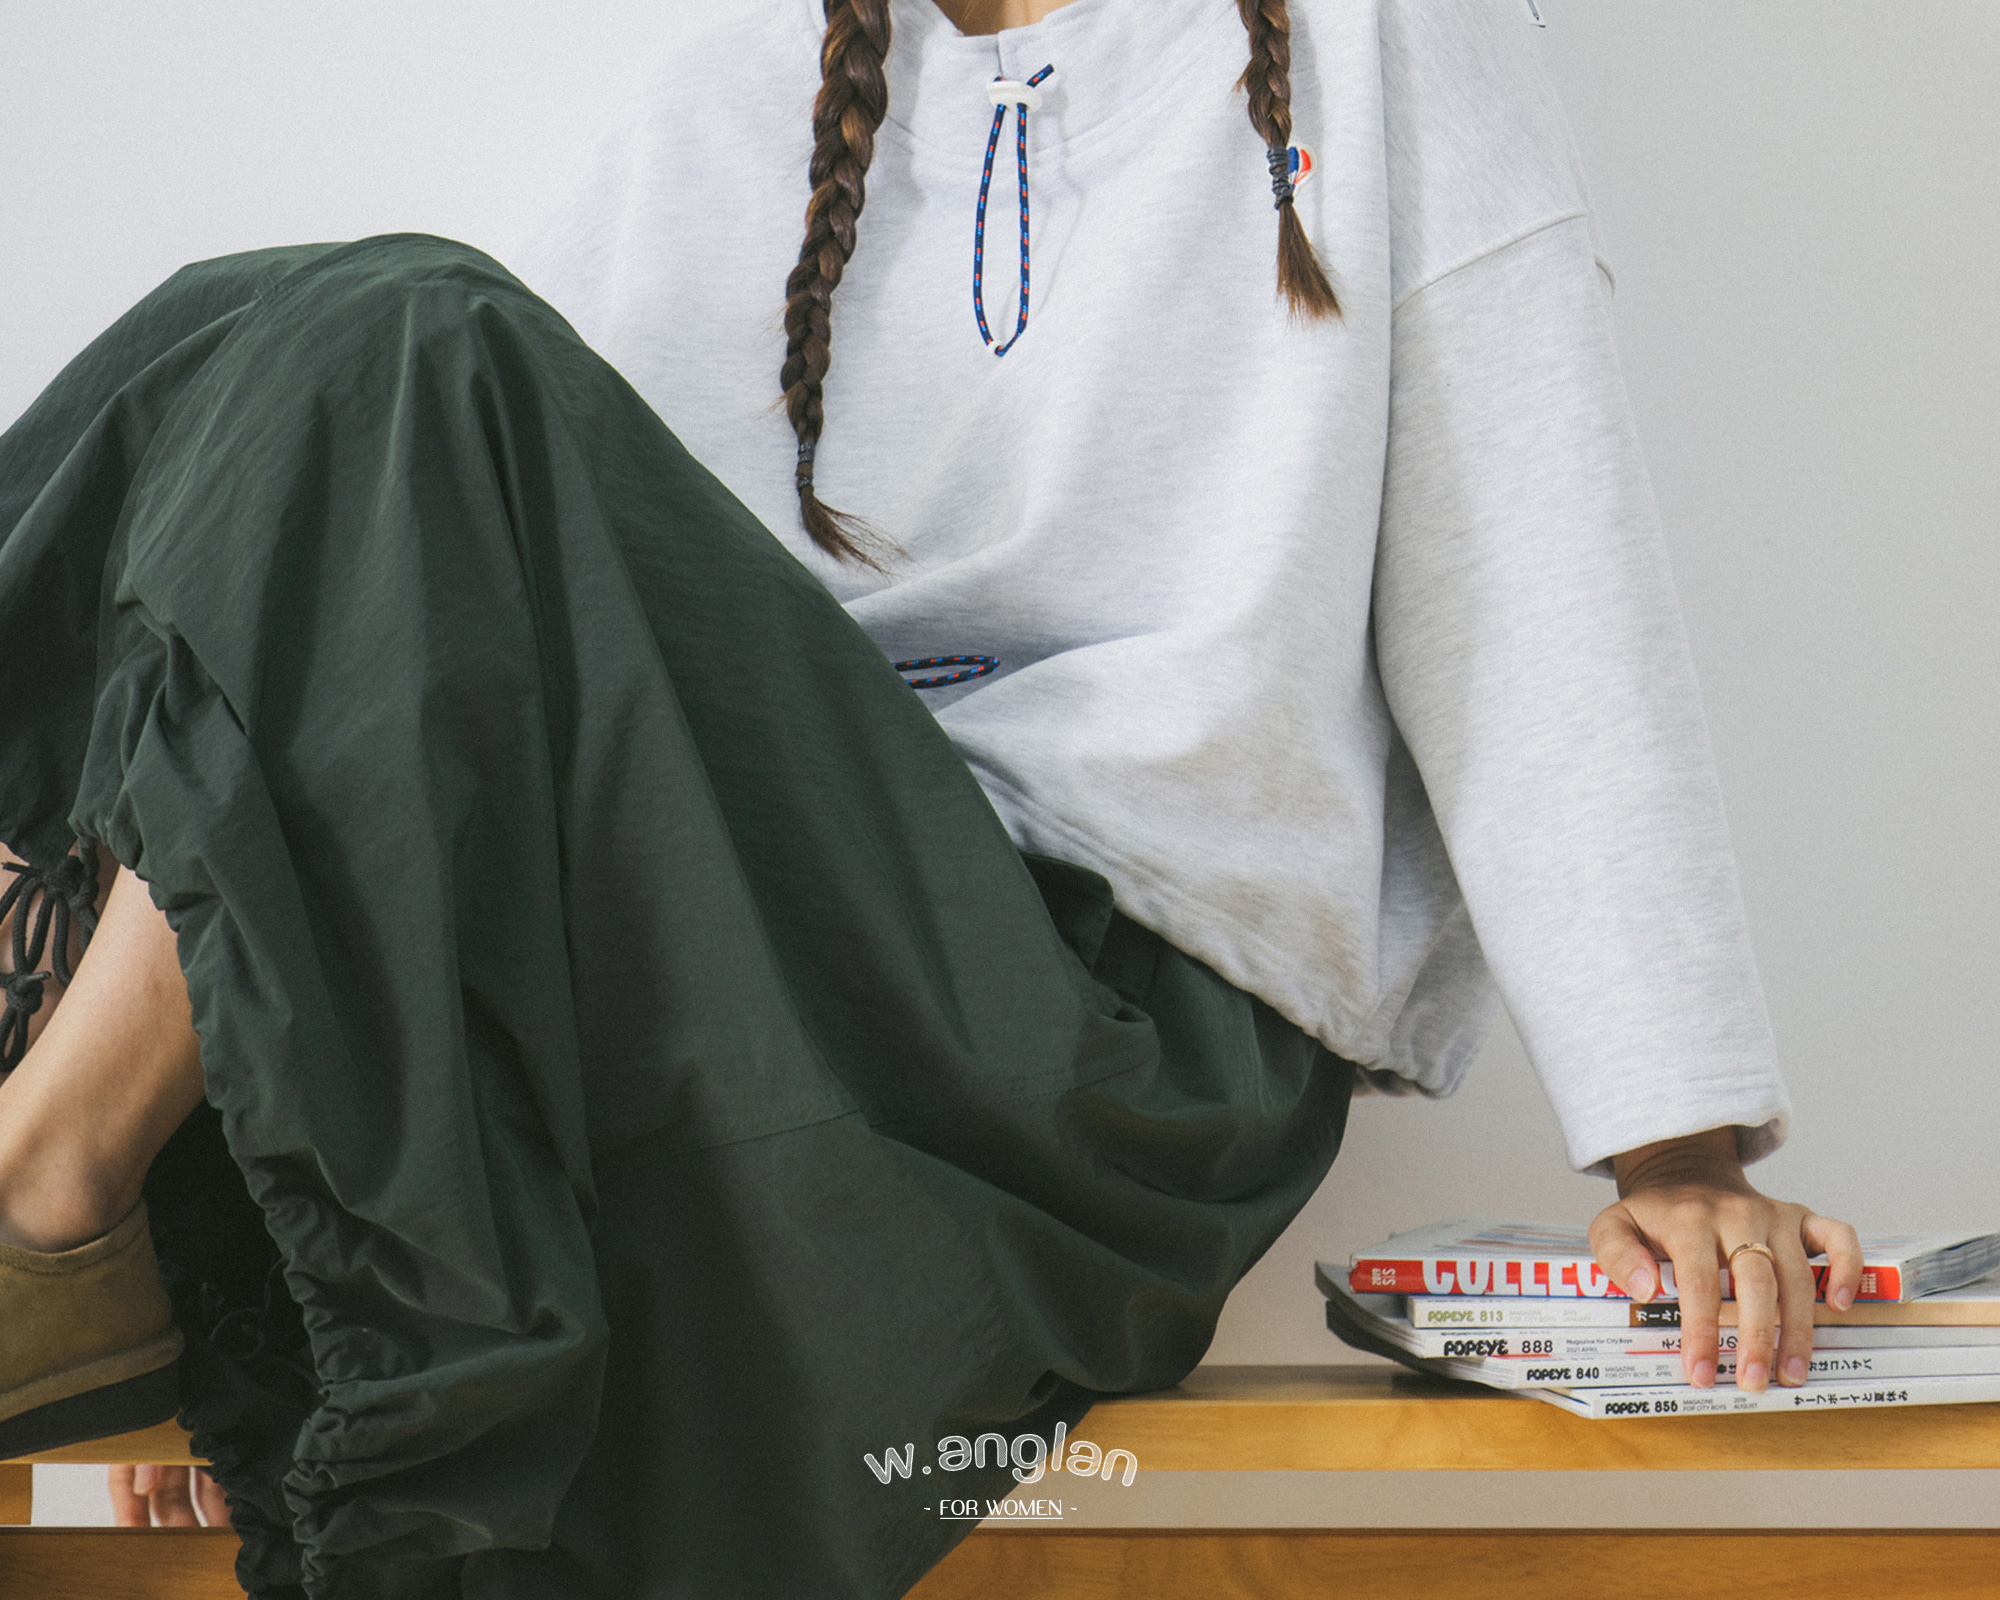 ANGLAN WOMEN 23FW 1st Capsule Collection